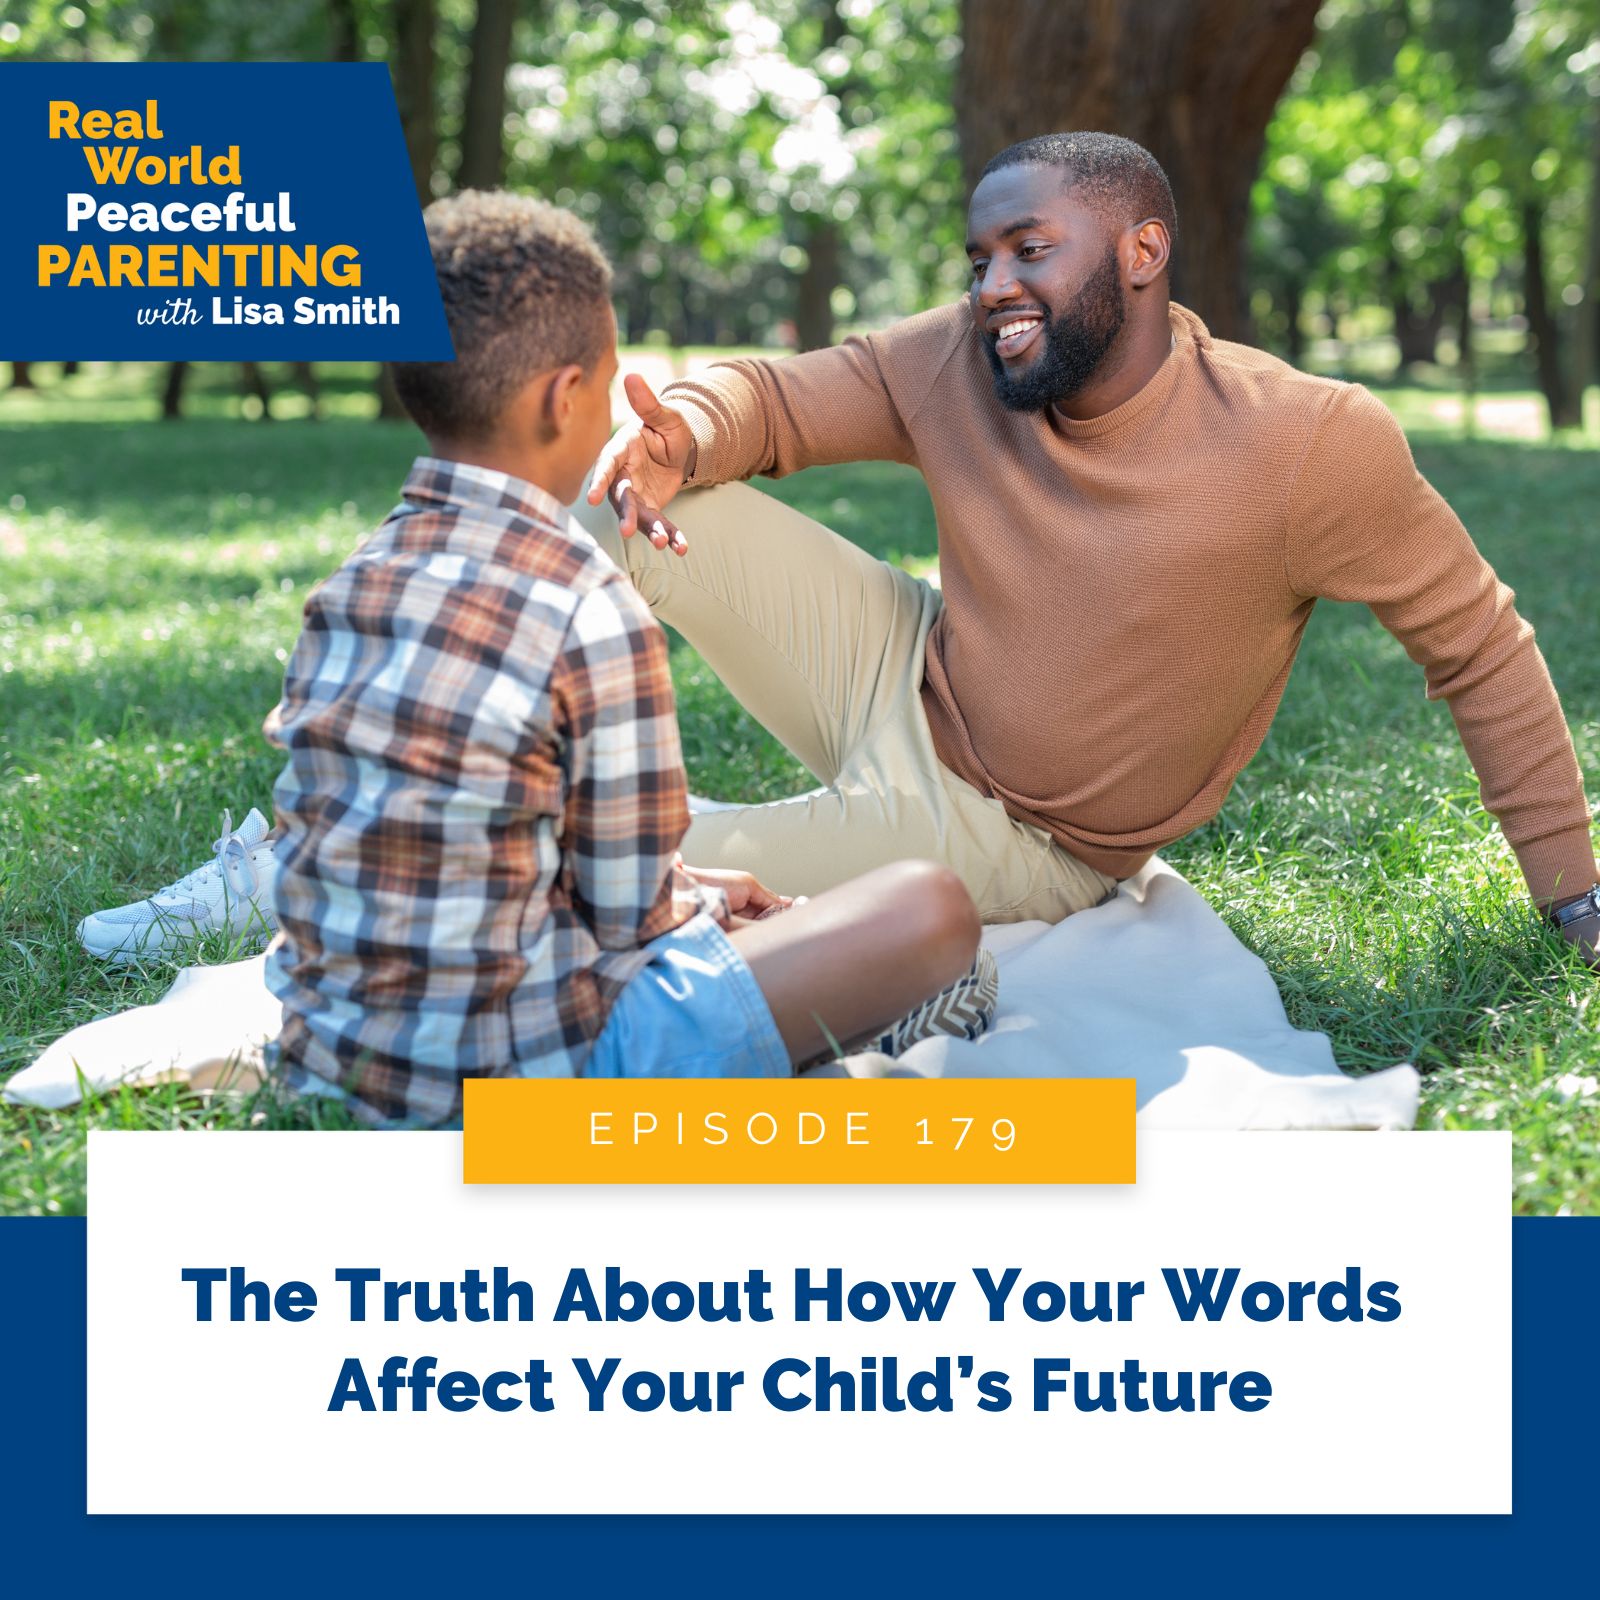 Real World Peaceful Parenting with Lisa Smith | The Truth About How Your Words Affect Your Child’s Future